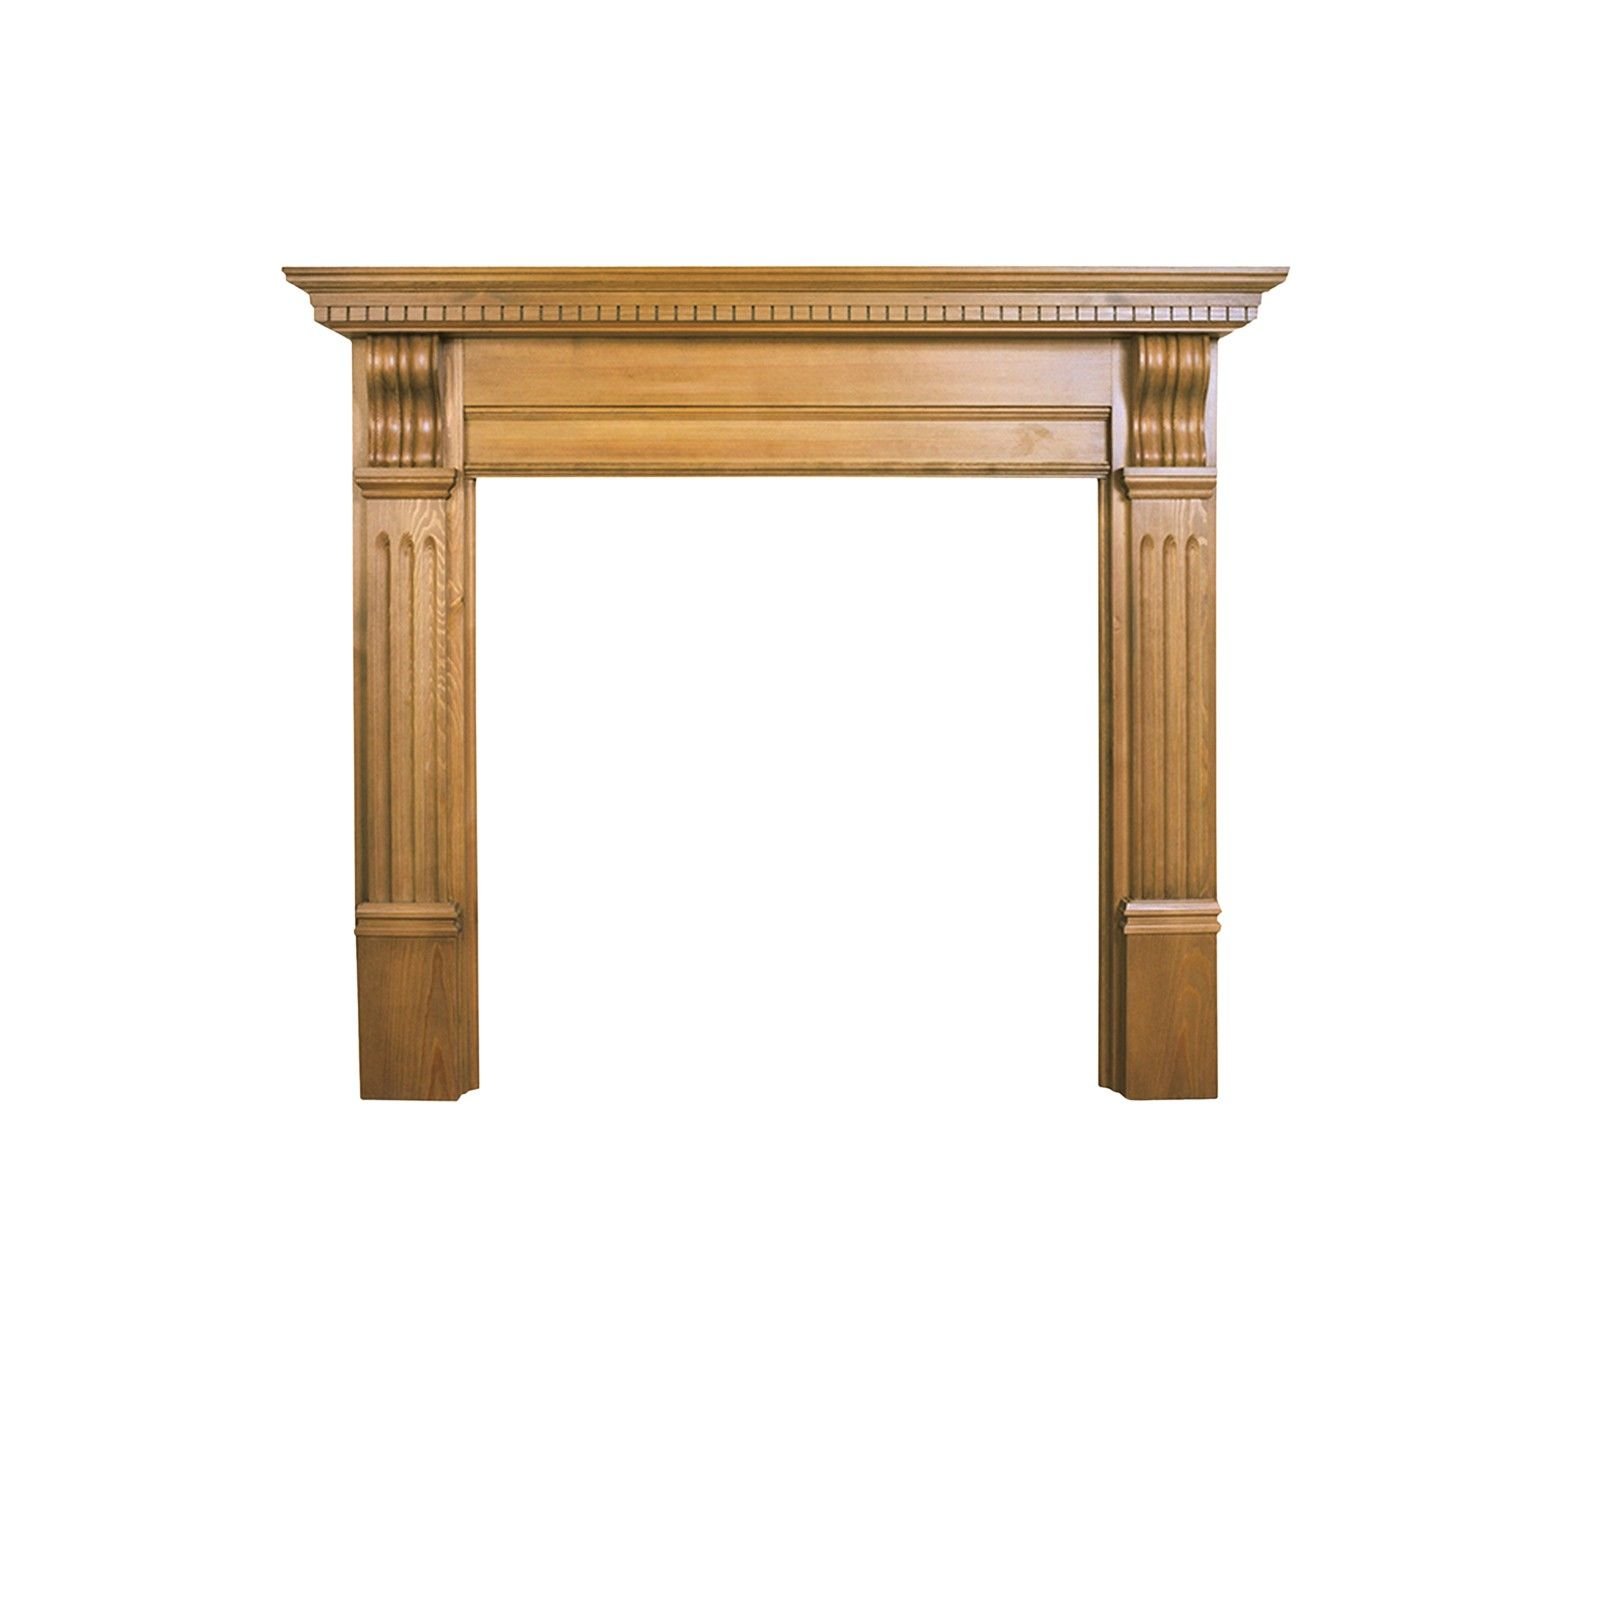 The Corbel Wooden Fireplace surround - choice of pine and oak